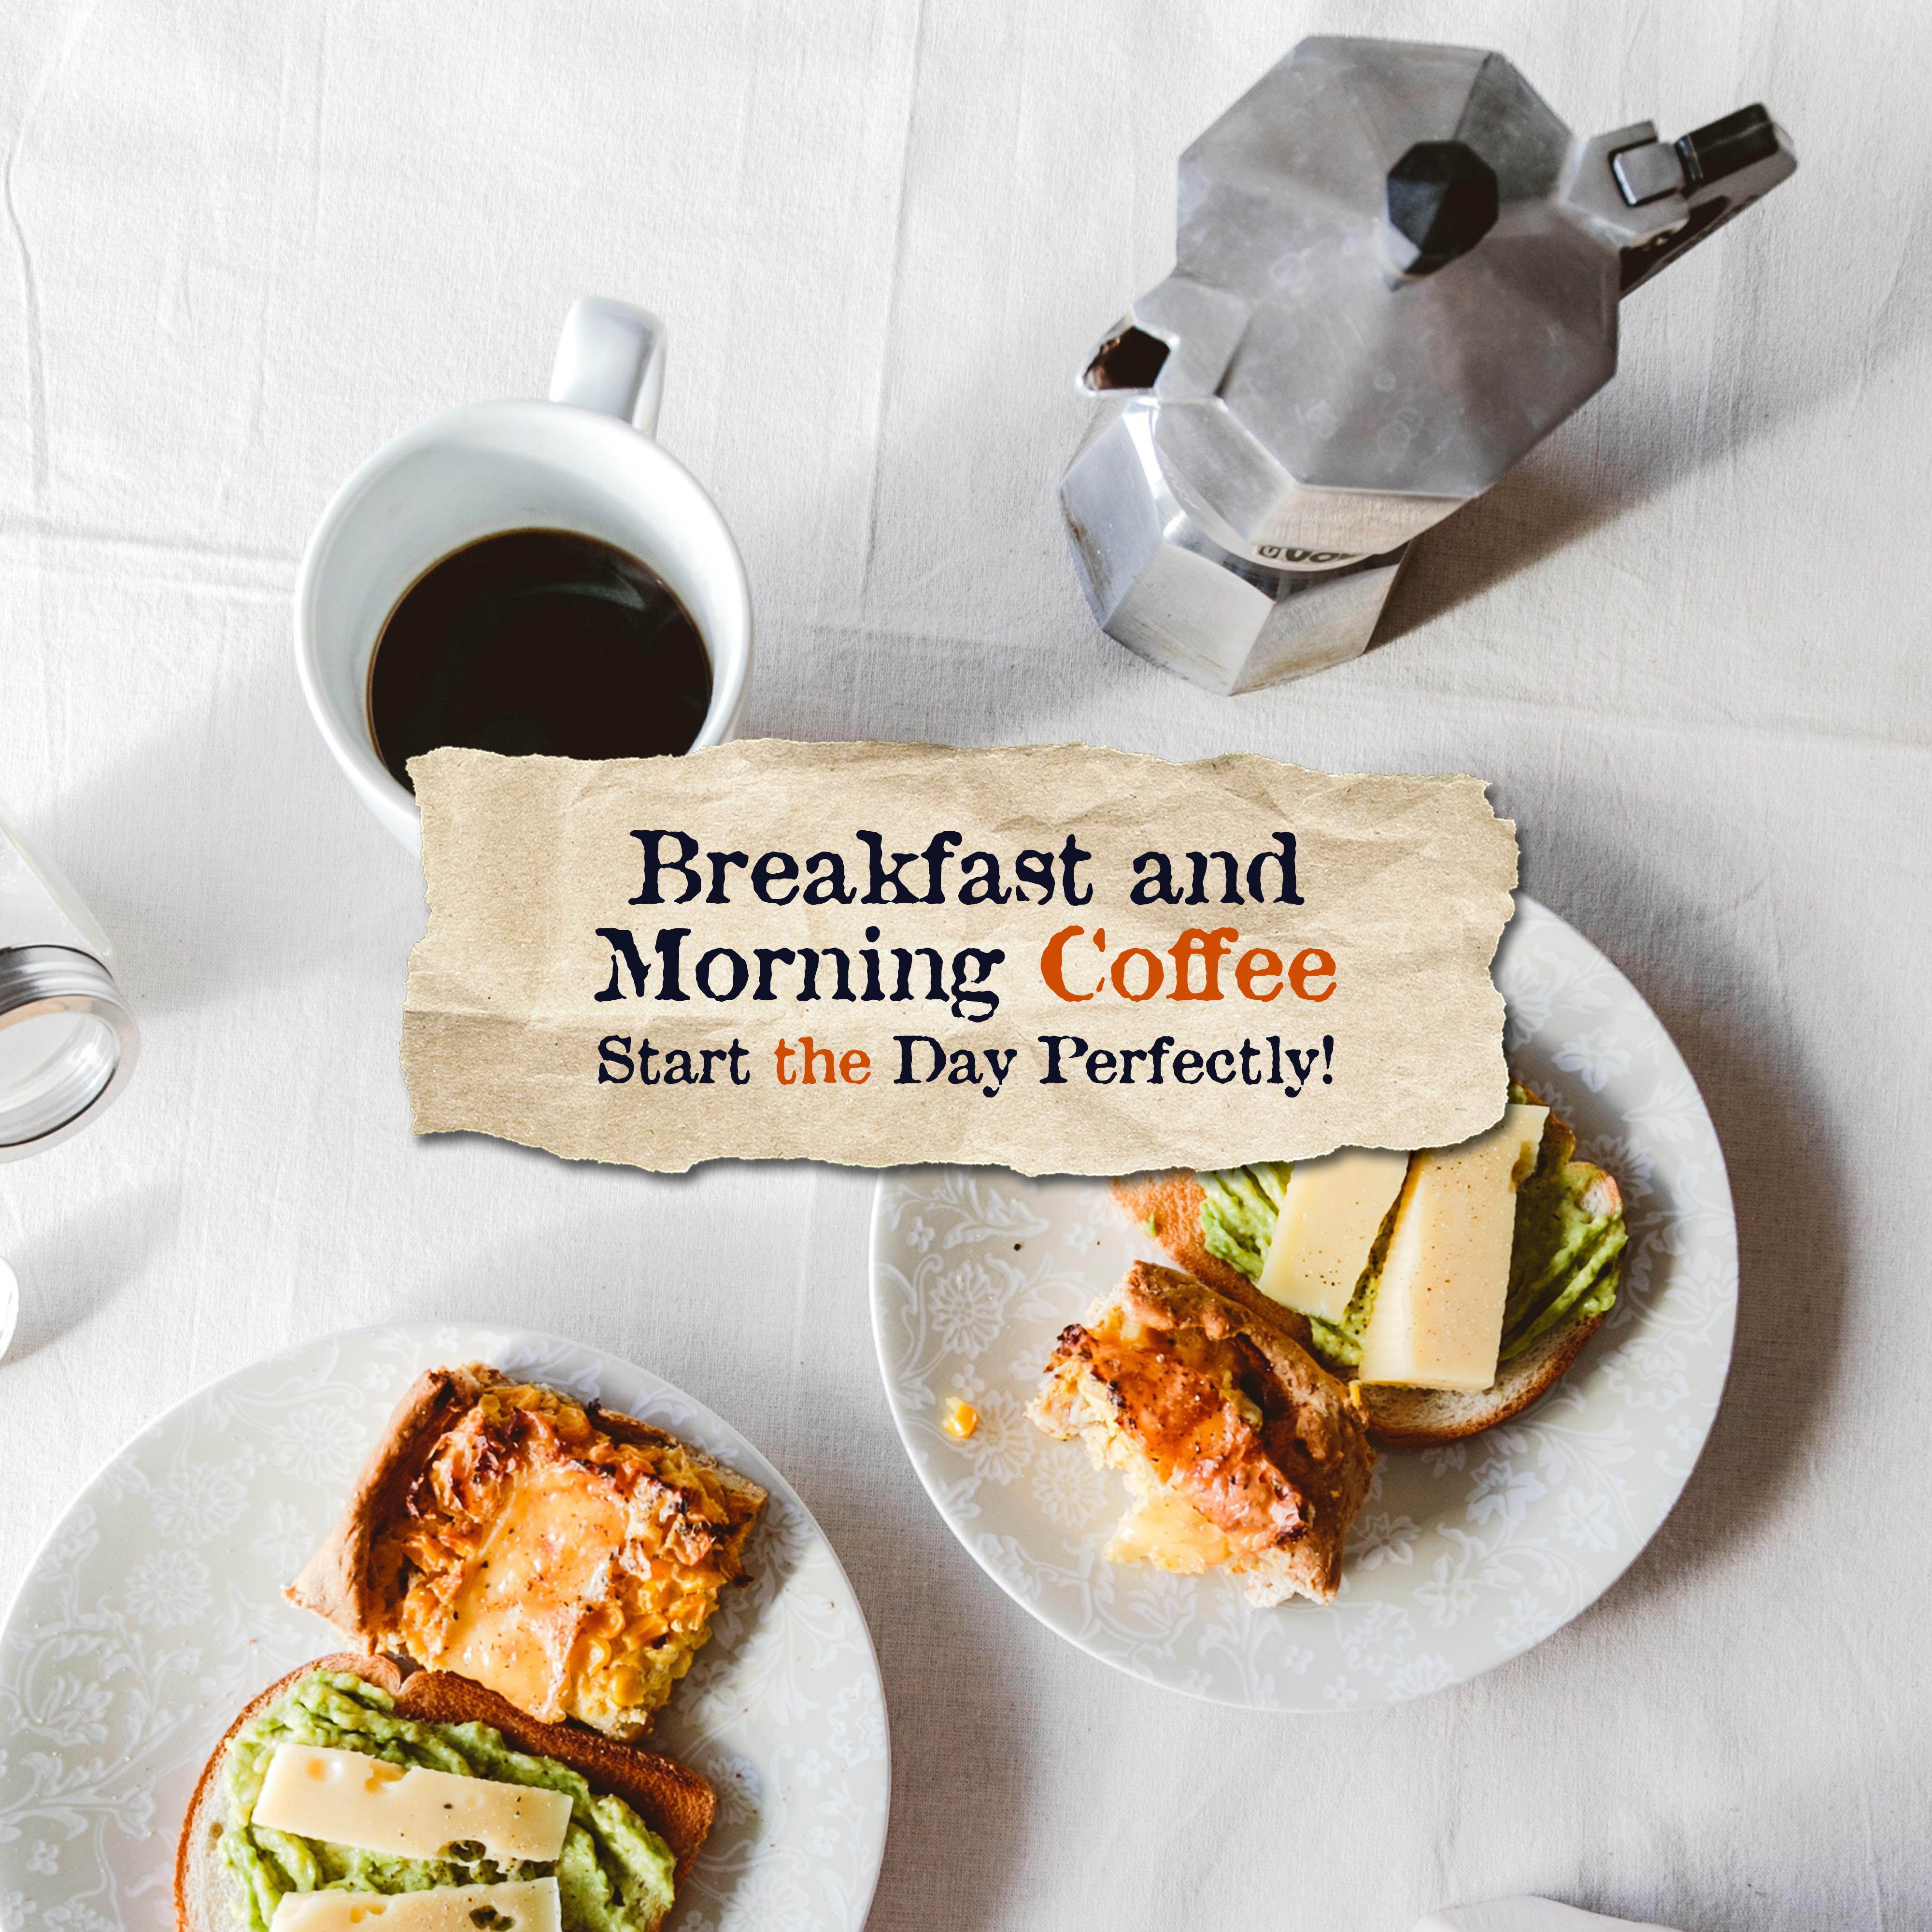 Breakfast and Morning Coffee - Start the Day Perfectly!